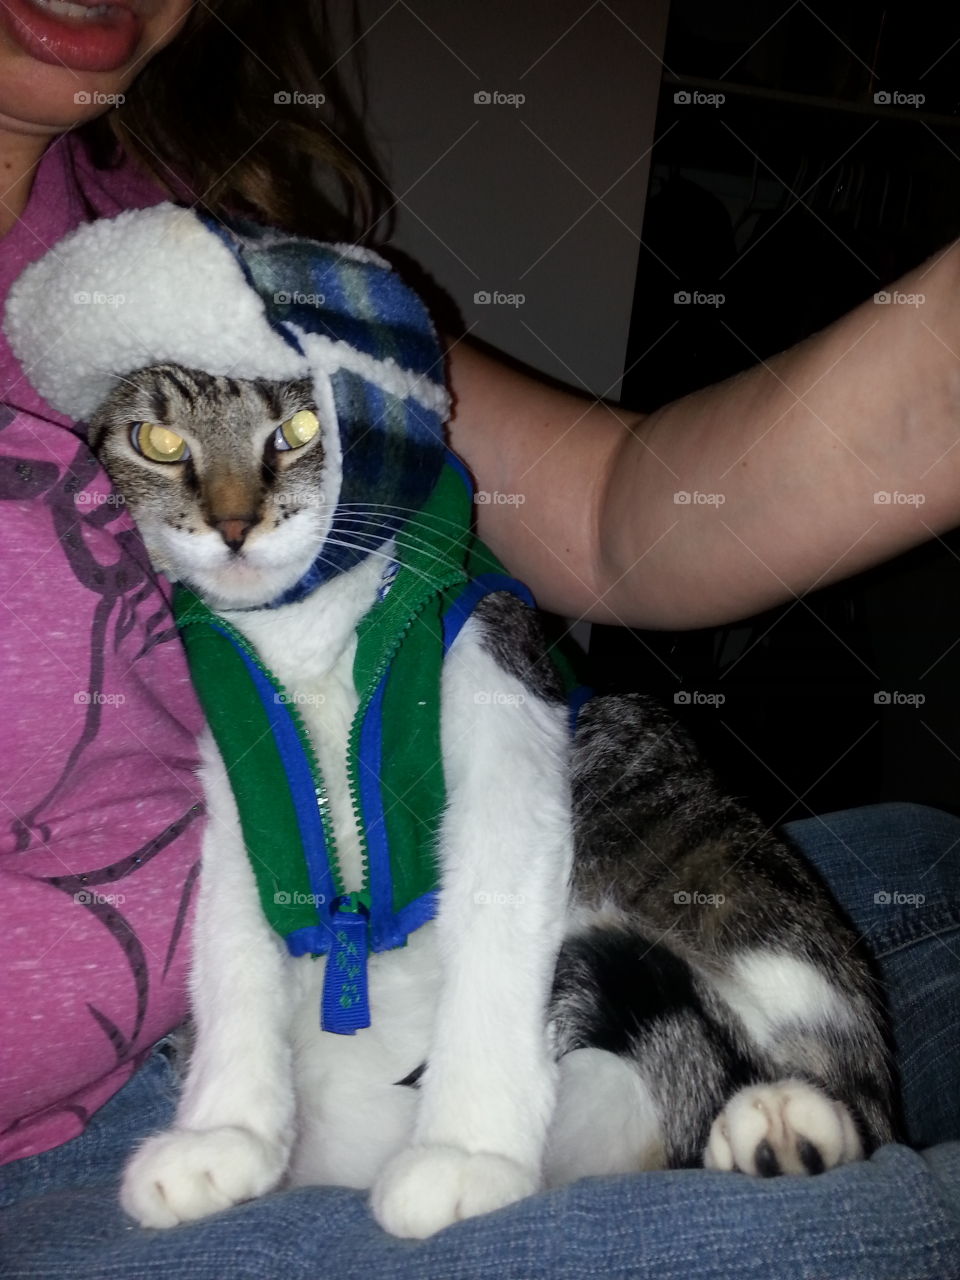 cat in sweater vest and hat, ready for the cold winter